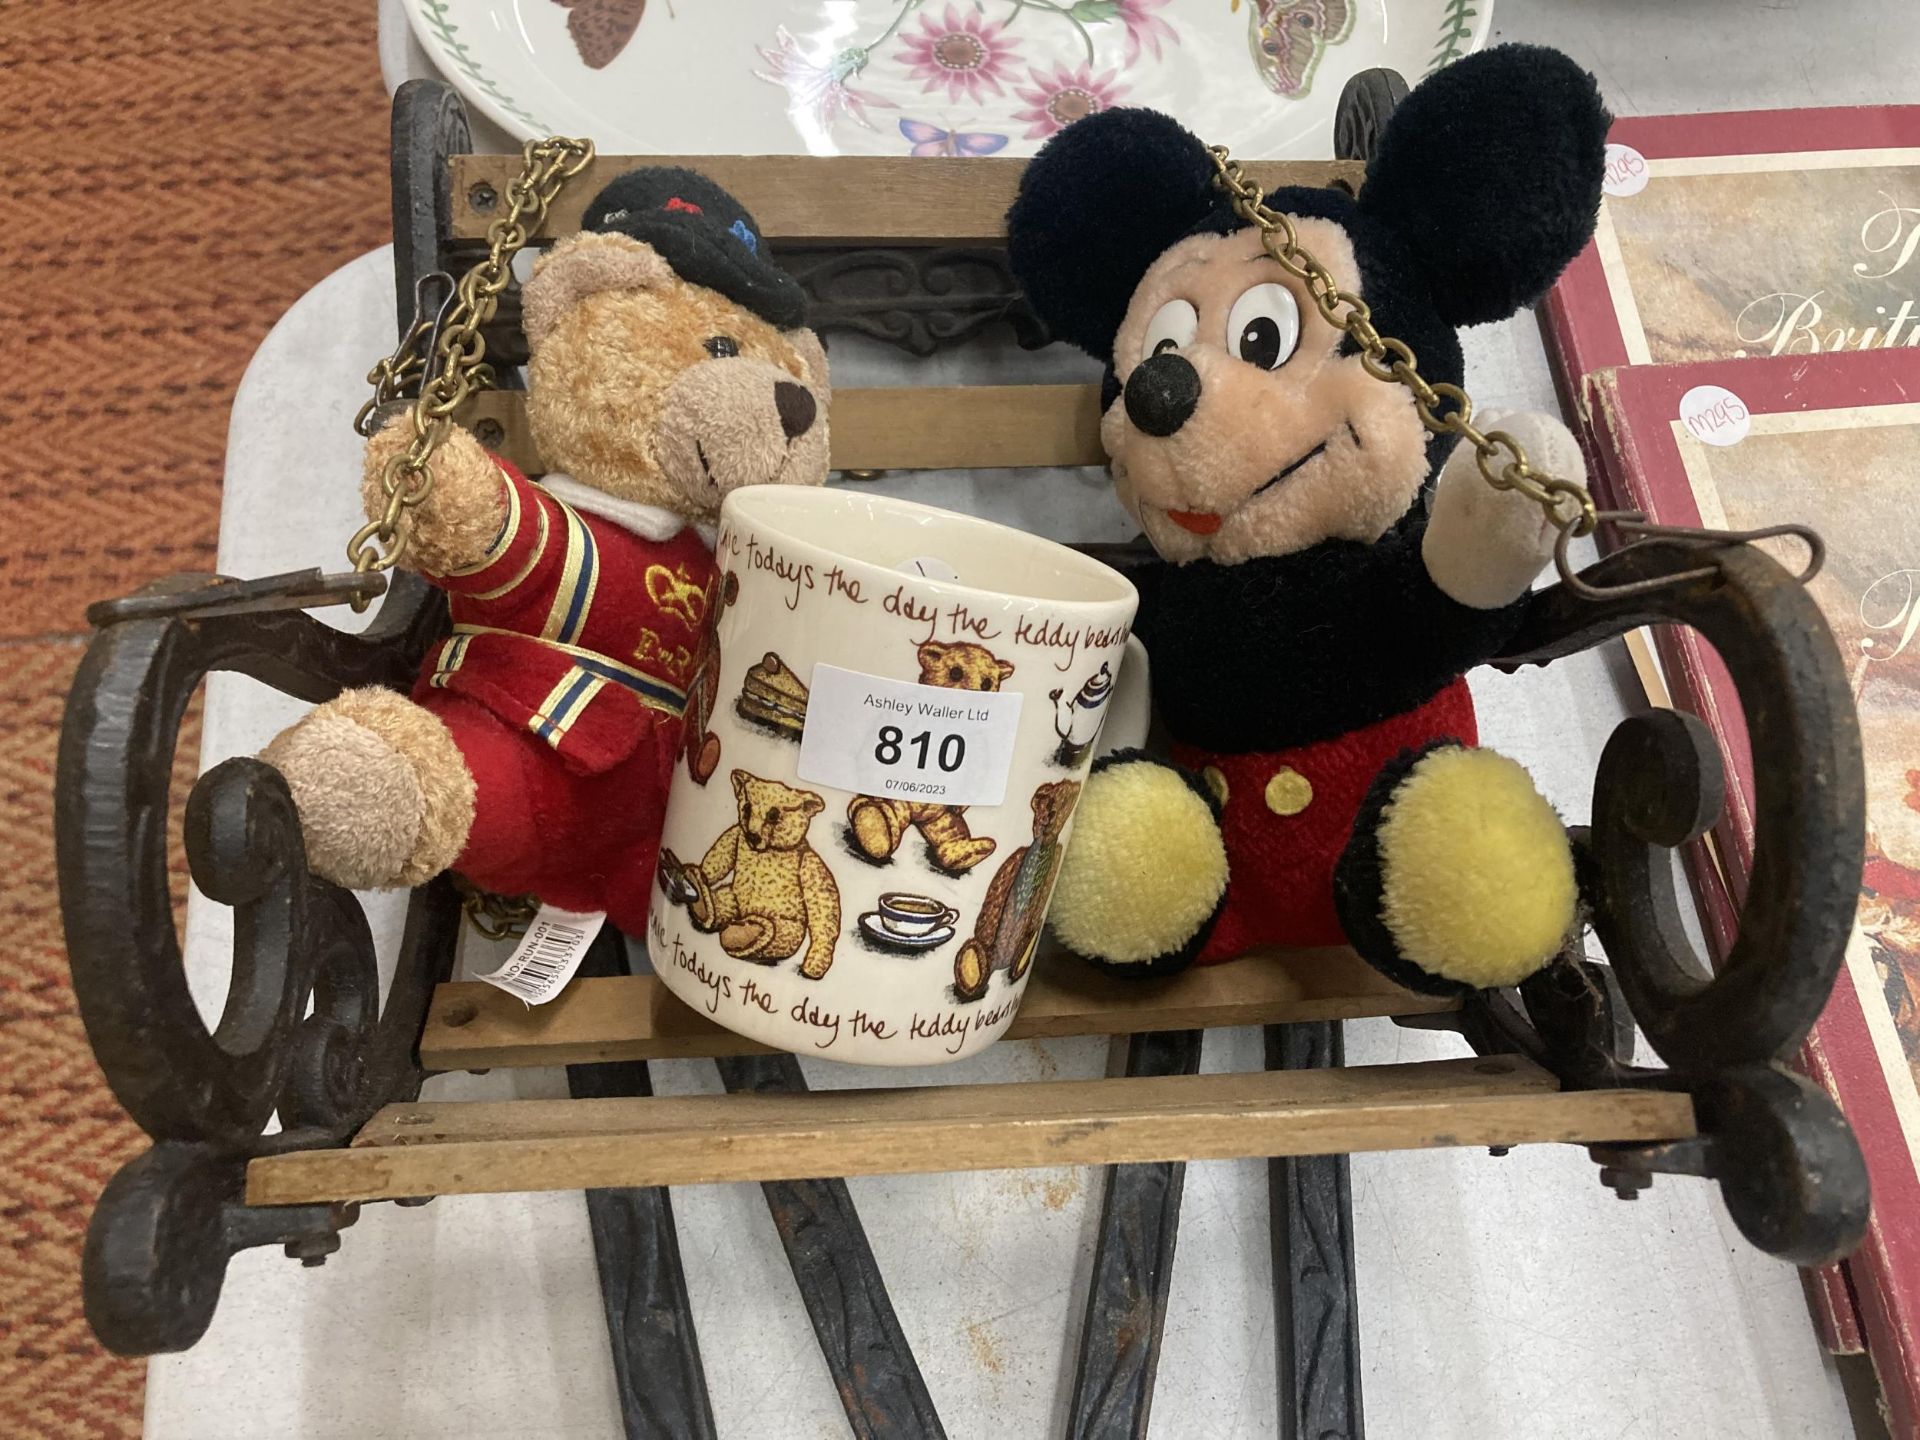 A CAST VINTAGE SMALL SWINGING SEAT WITH STAND PLUS MICKEY MOUSE AND TEDDY PLUSH FIGURES AND A MUG